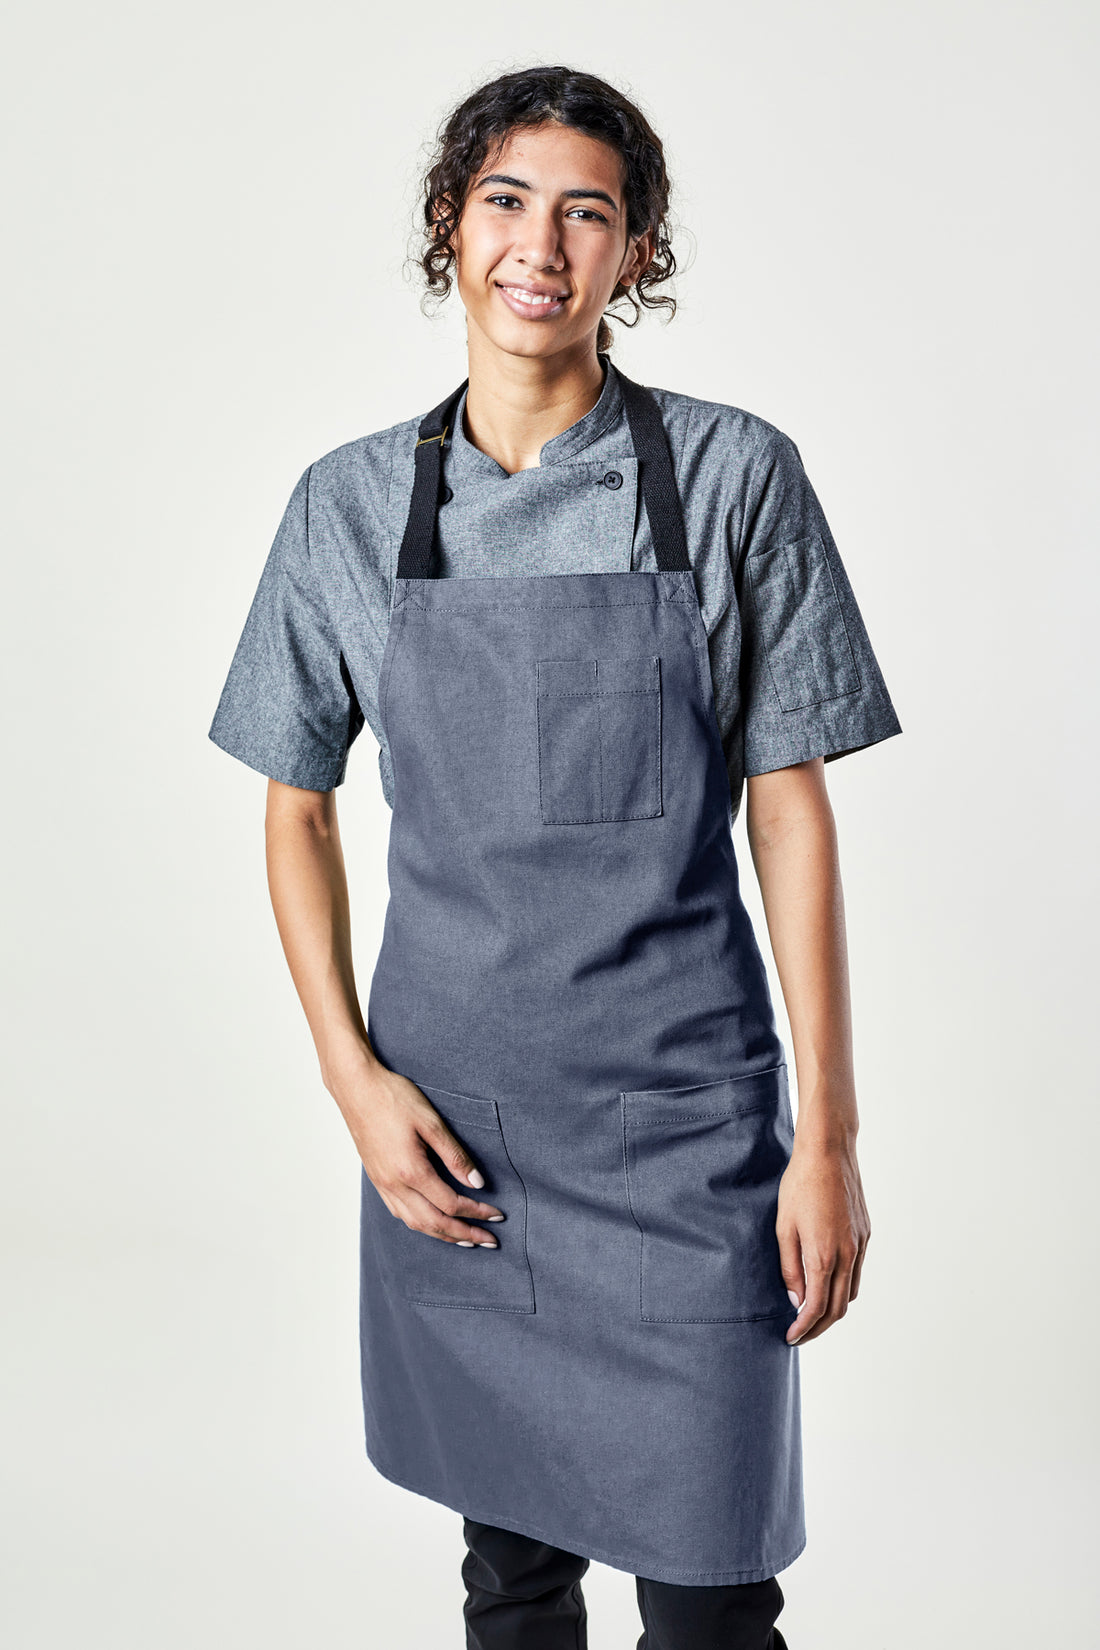 Image of person wearing Mise Apron in Canvas. | BlueCut Aprons